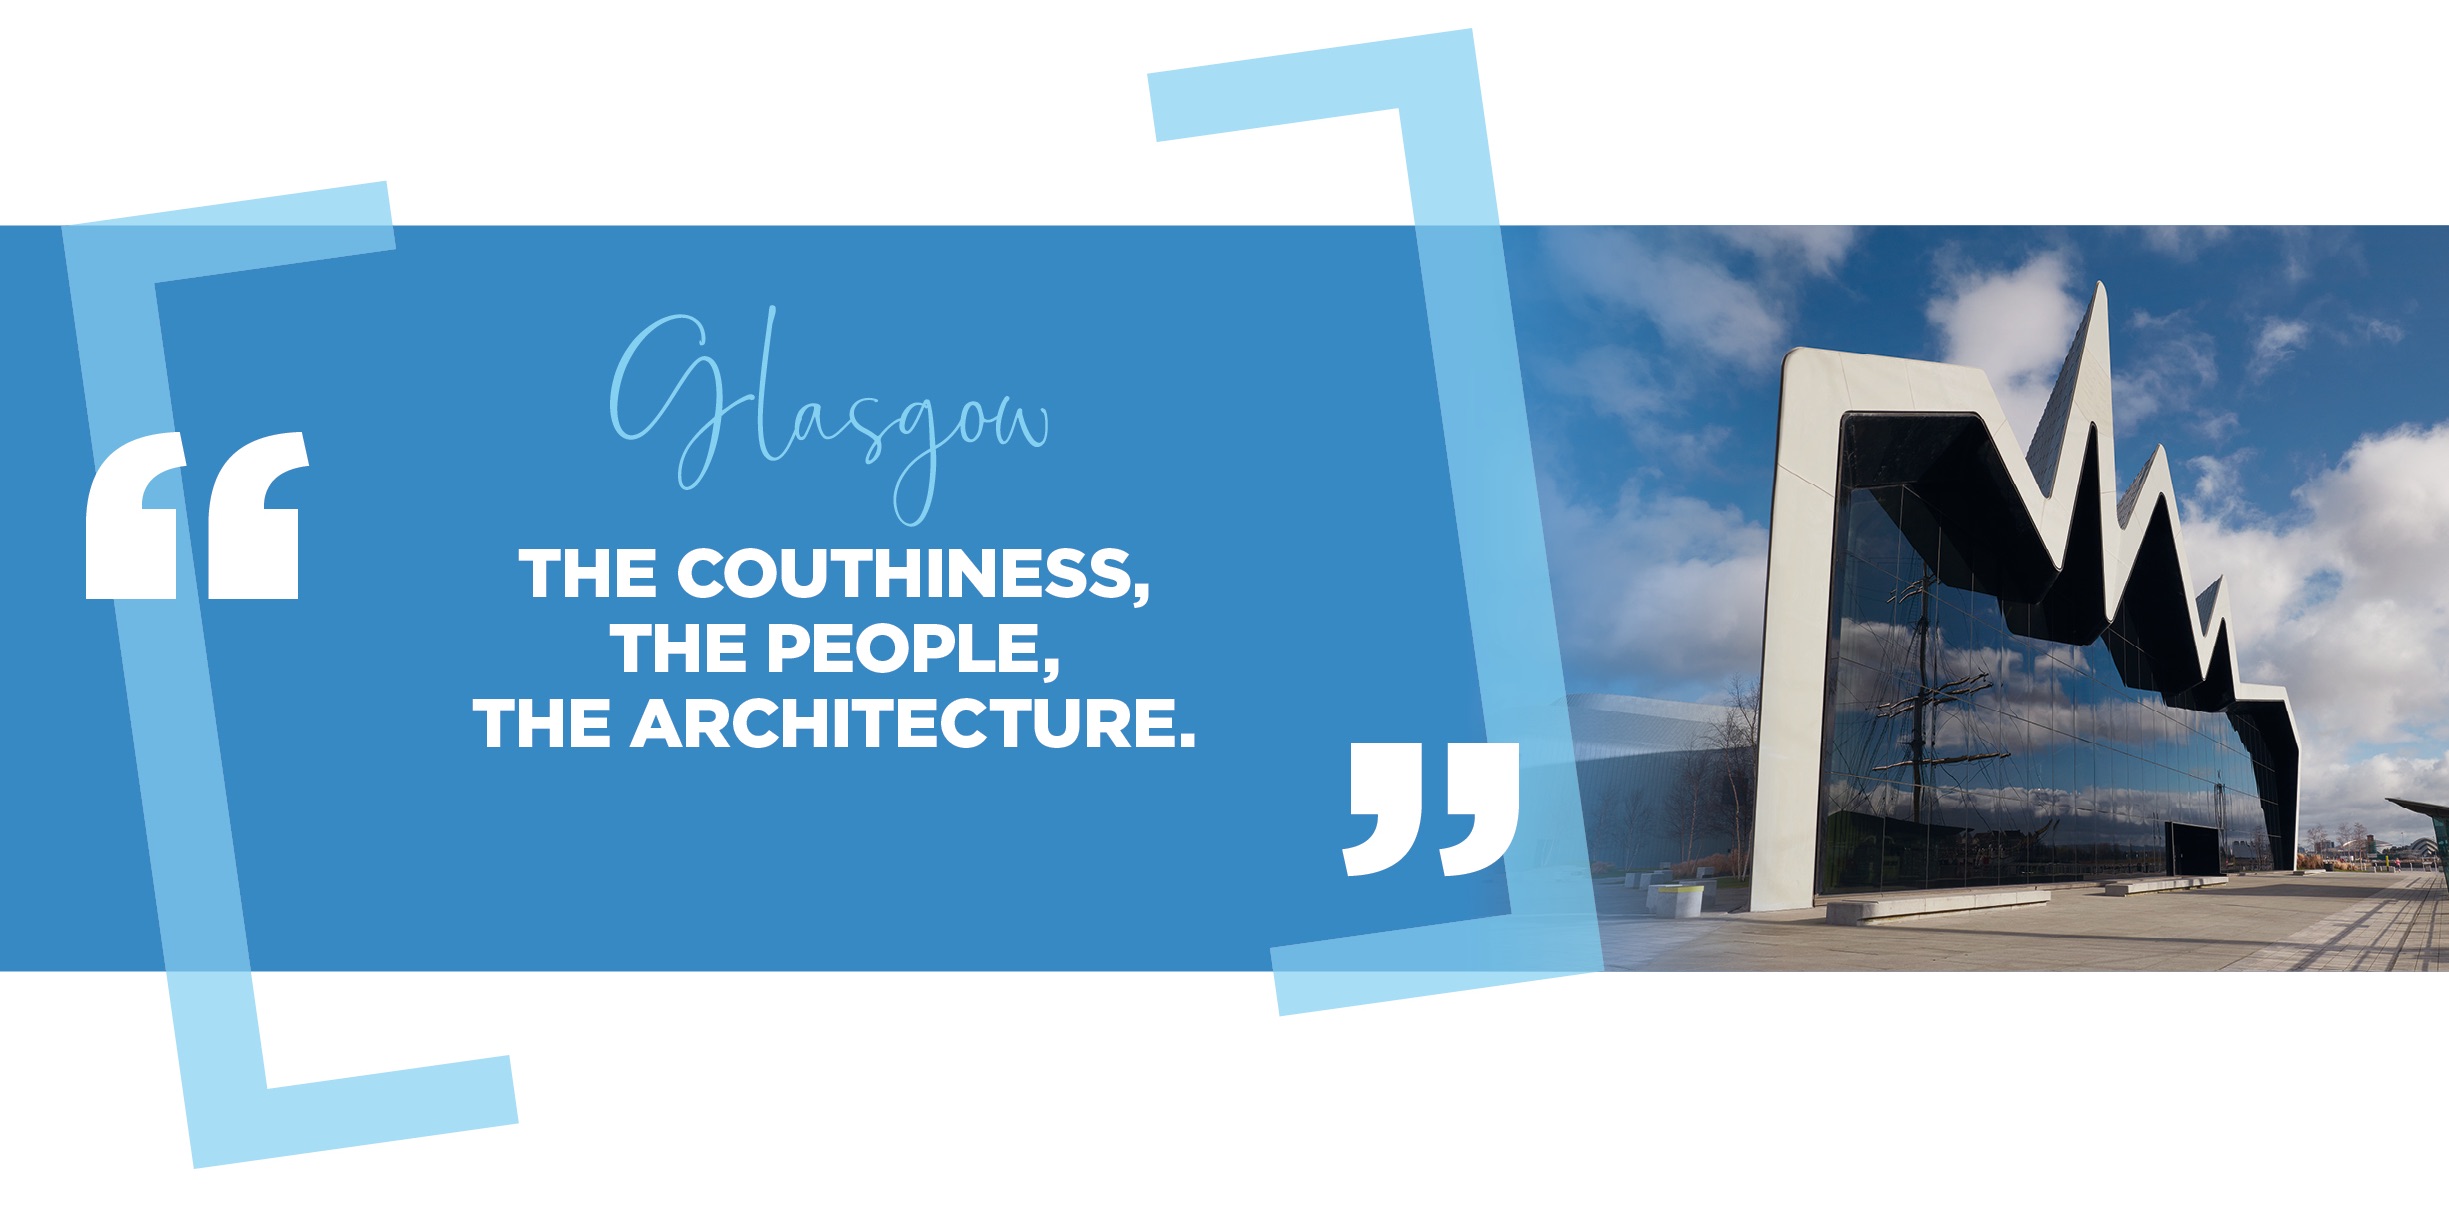 Image showing a quote from a Glasgow resident "The couthines, the people, the architecture"